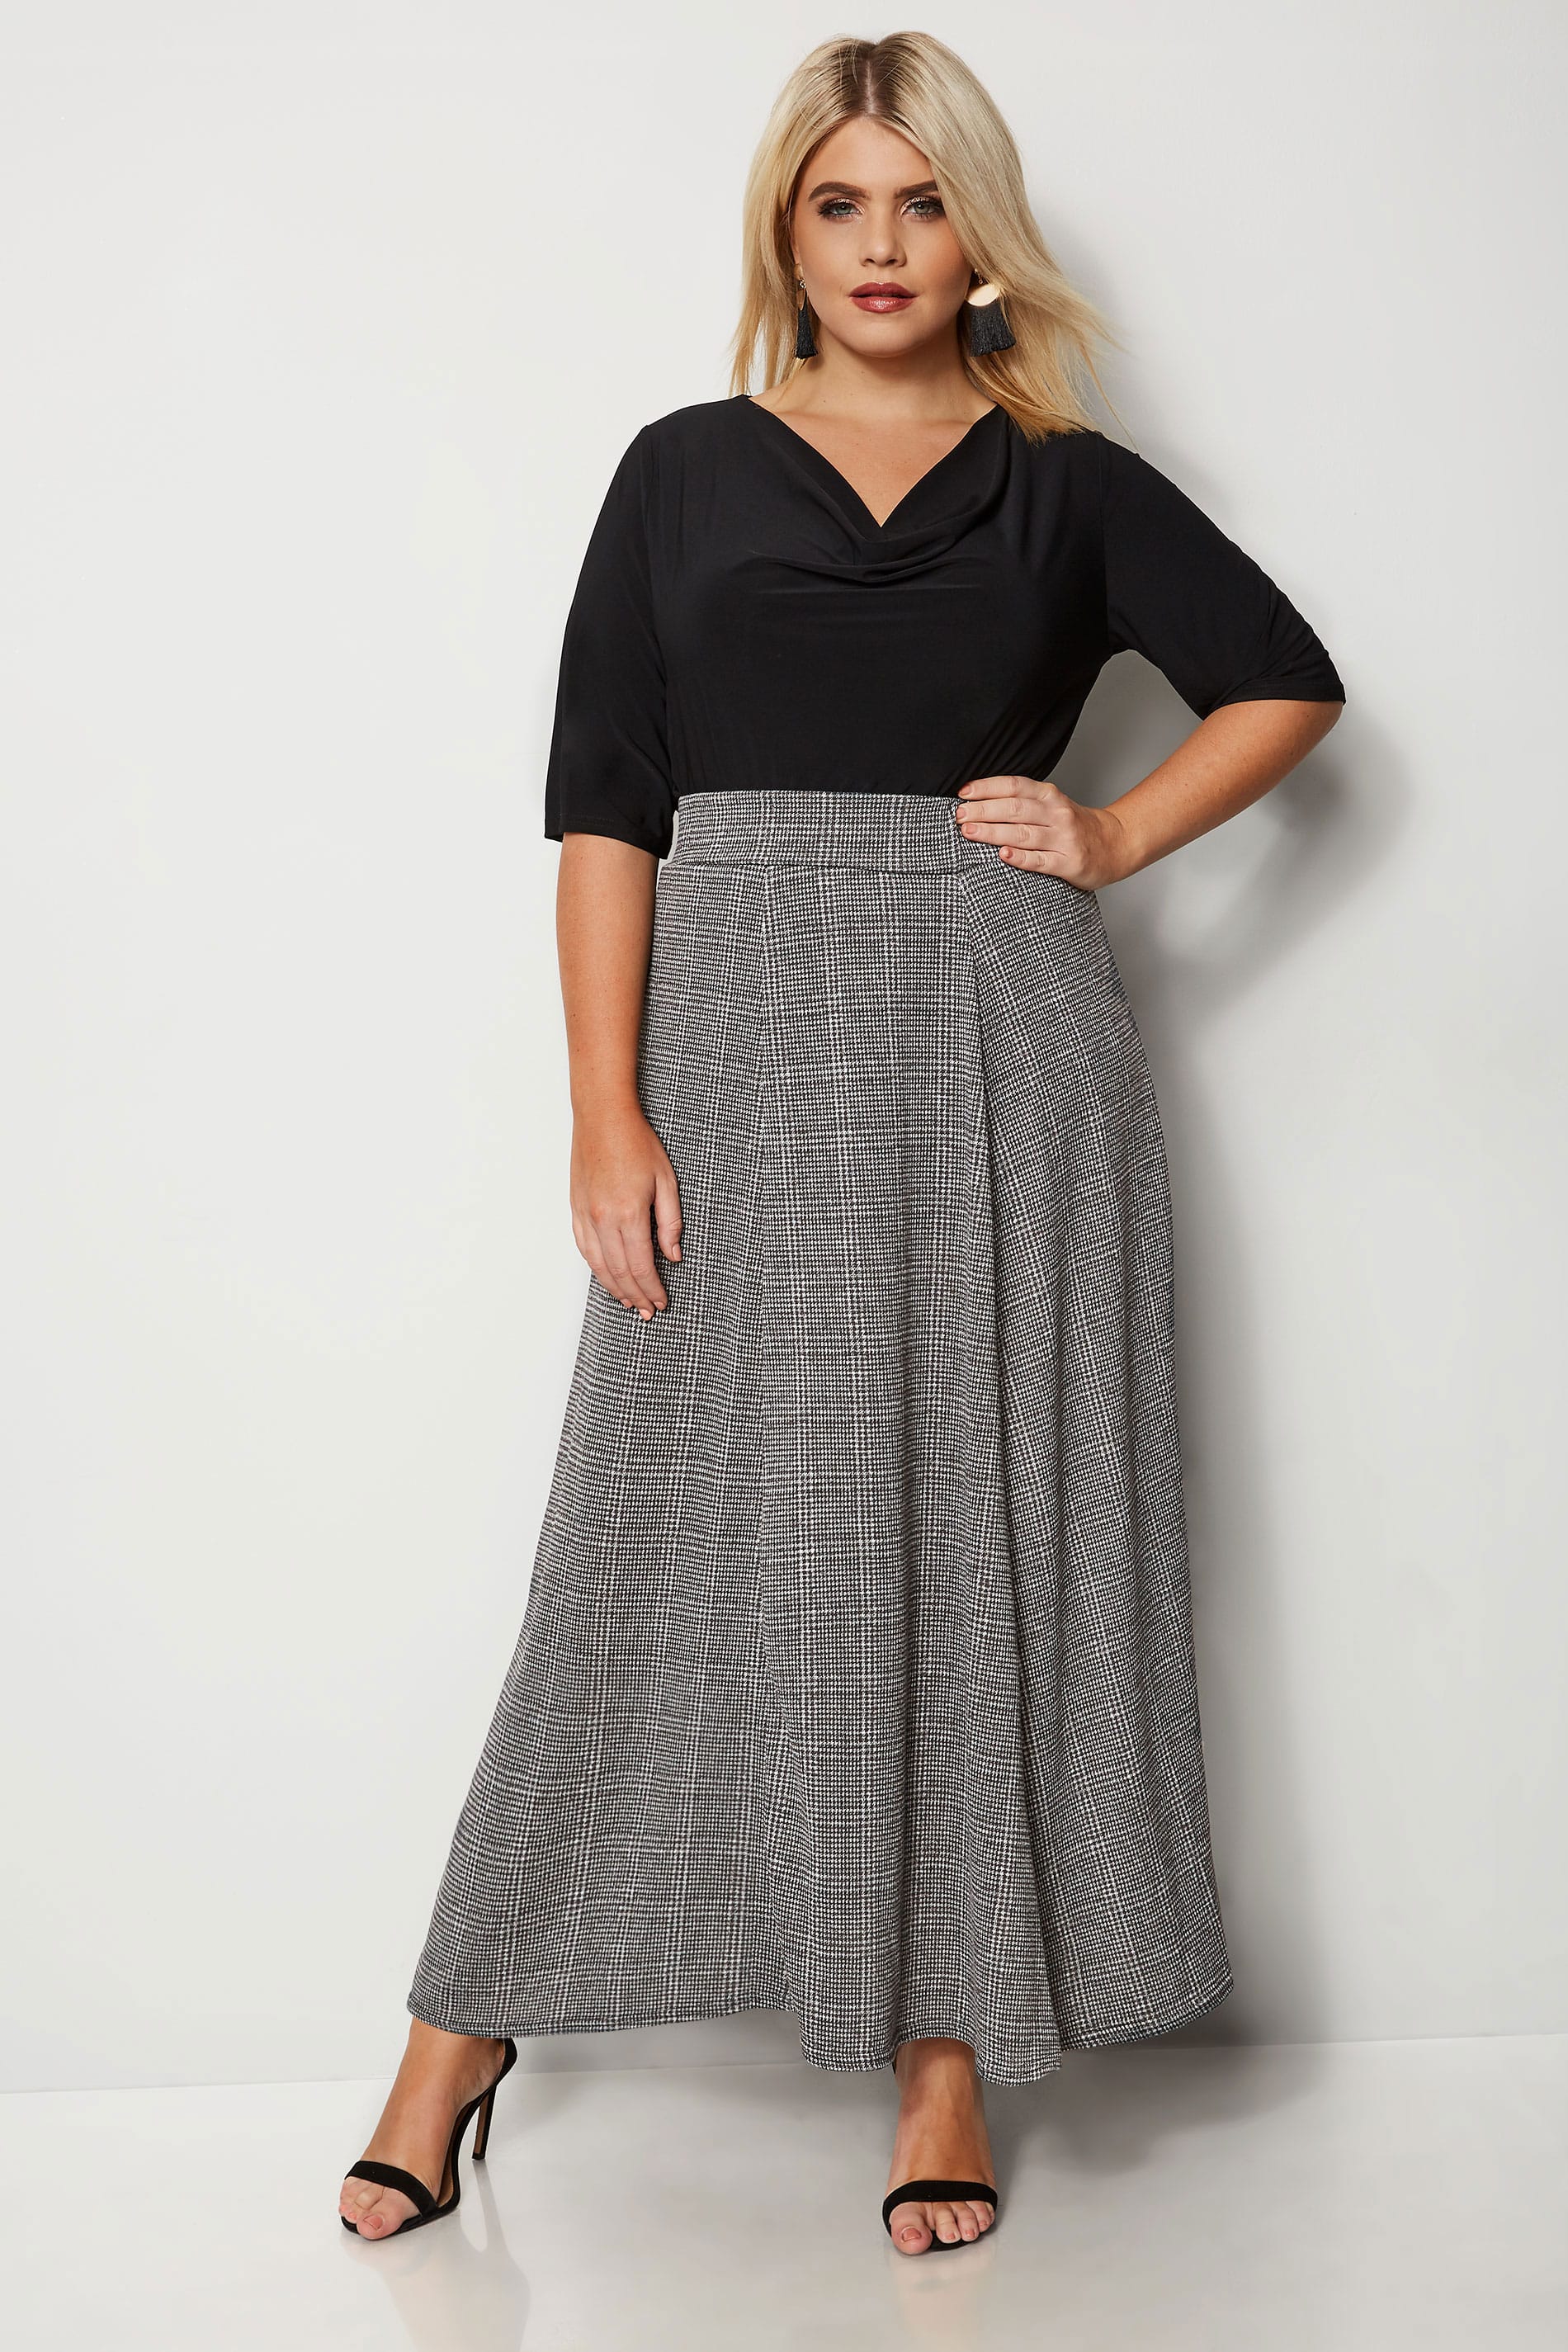 Grey Checked Maxi Skirt, plus size 16 to 36 | Yours Clothing